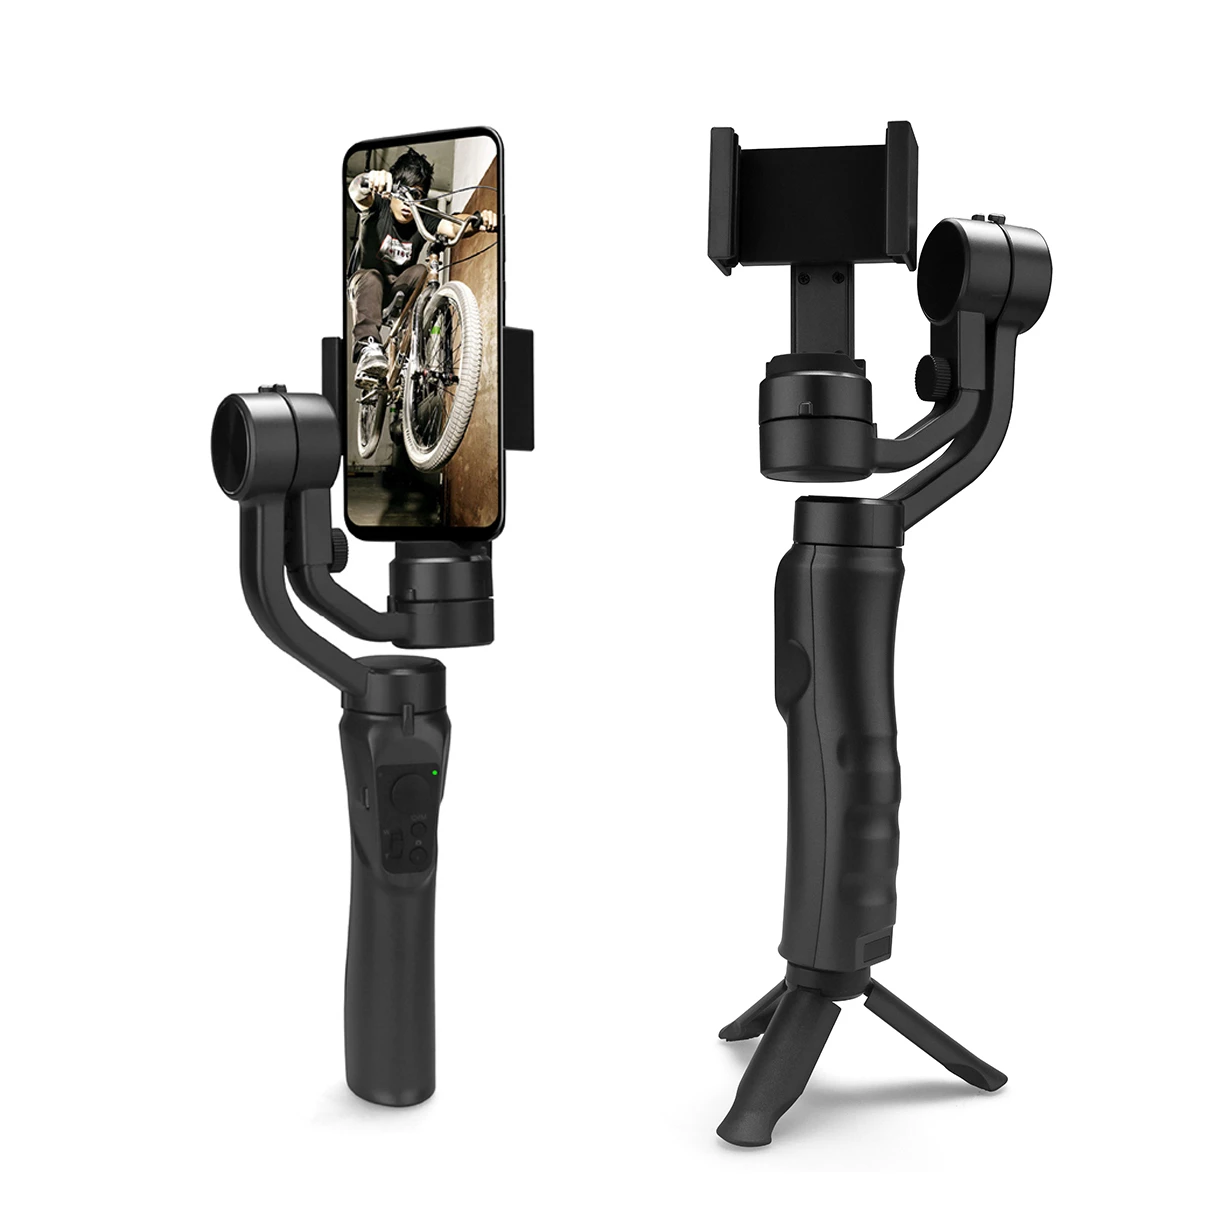 New Mobile Phone Balanced Video Handheld Gimbal 3 axis Stabilizer Vlog Selfie Stick Gimble with Tripod Live Streaming